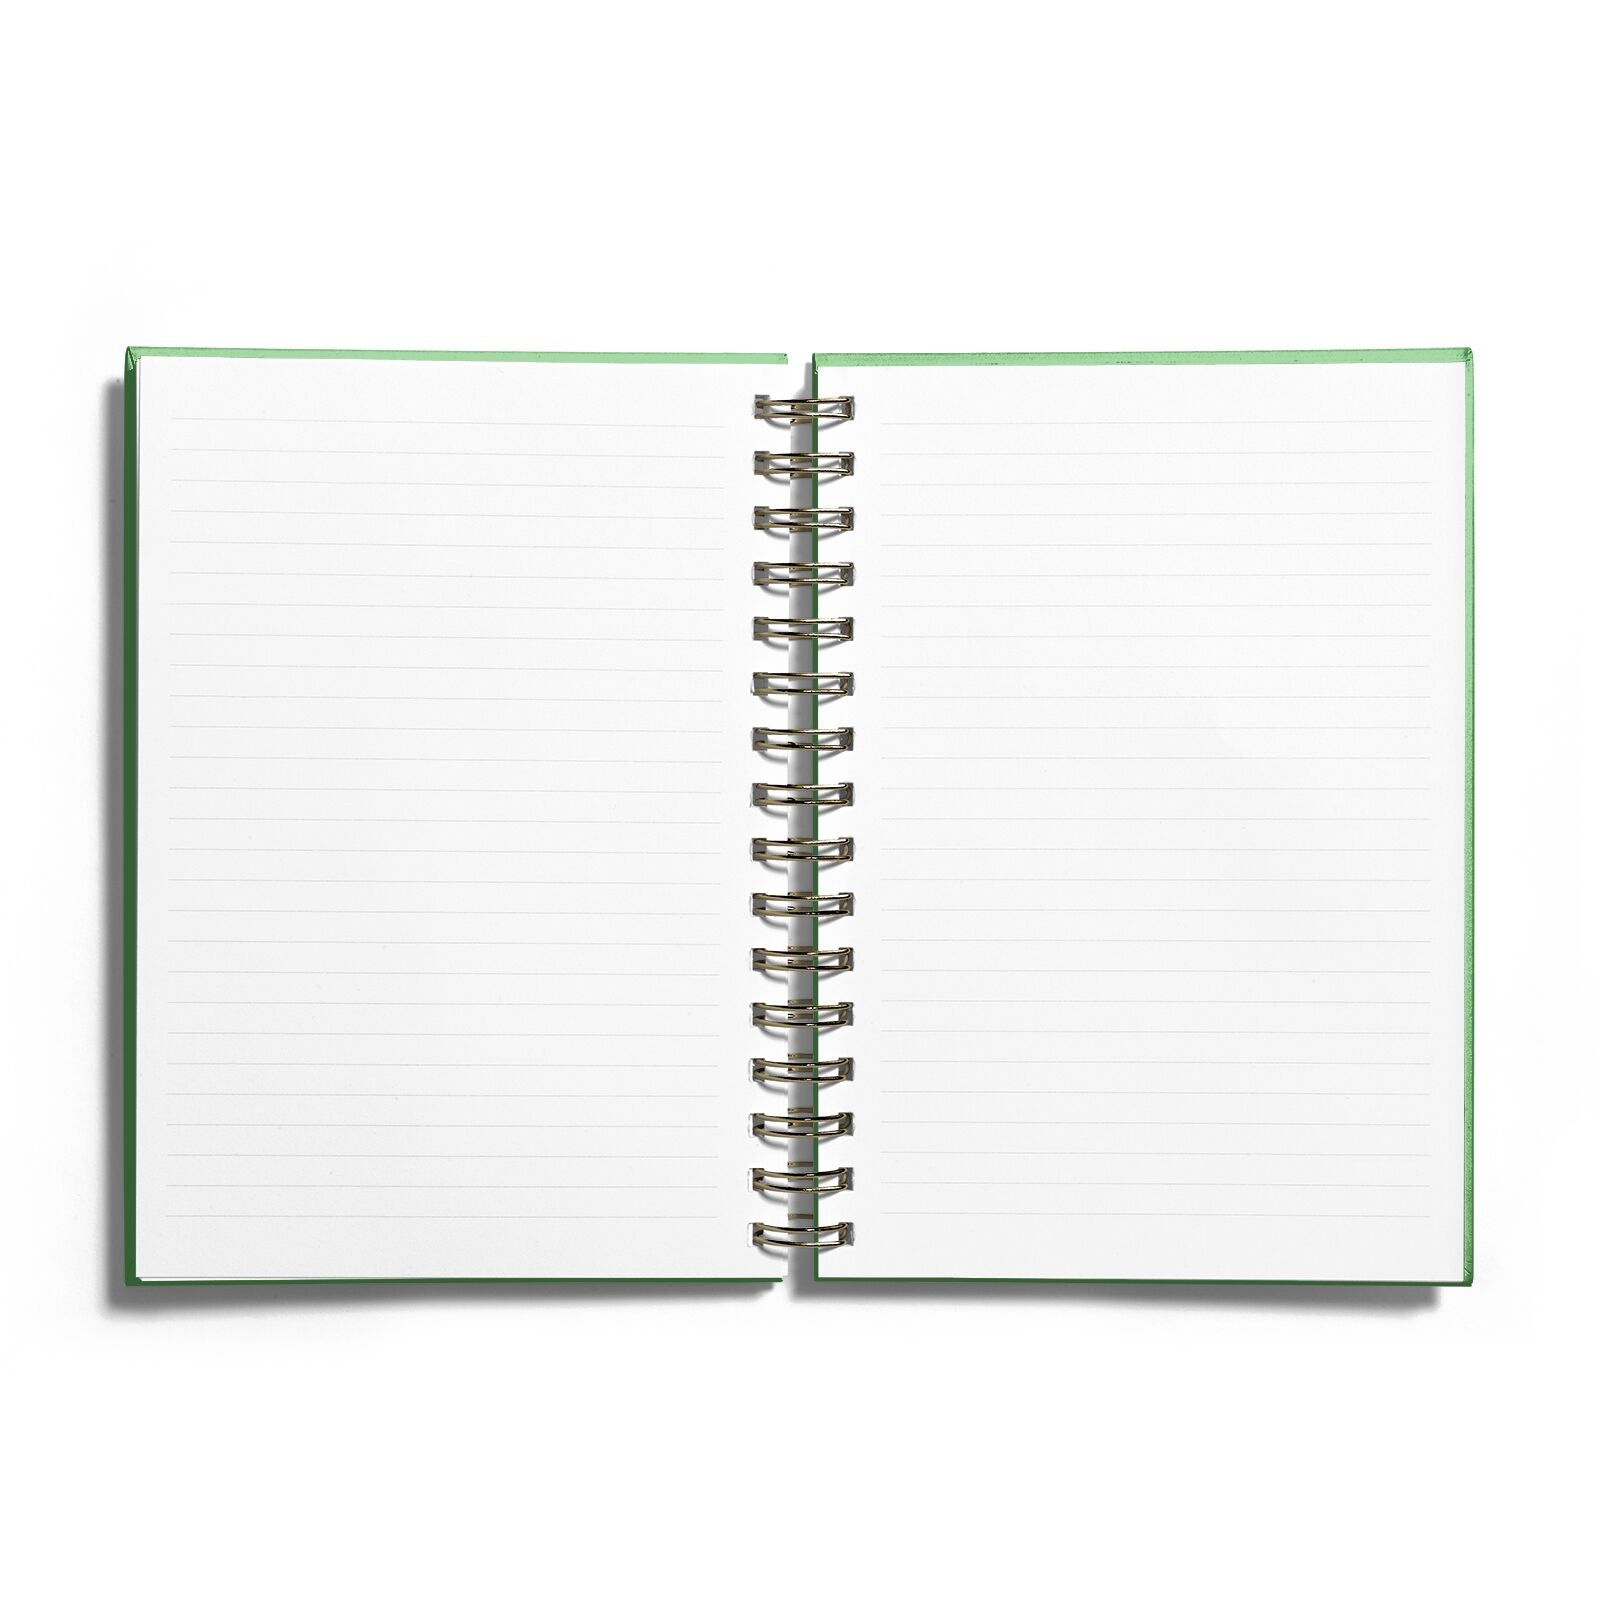 Photo Upload Leprechaun Hat Notebook with Bronze Coil and Lined Paper